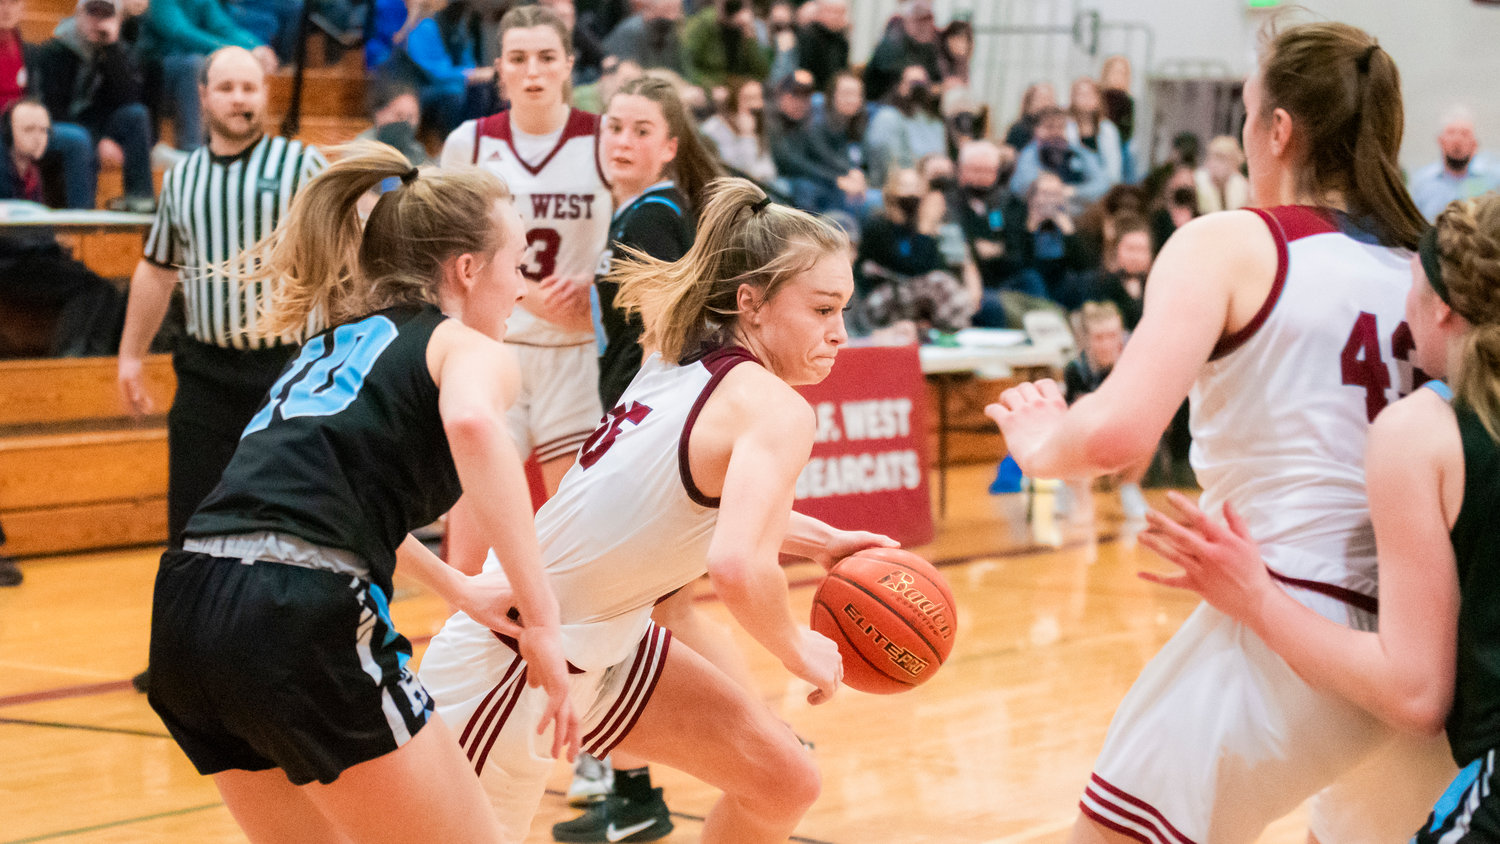 W.F. West senior Kyla McCallum (25) dribbles around defenders during a game Friday night in Chehalis.